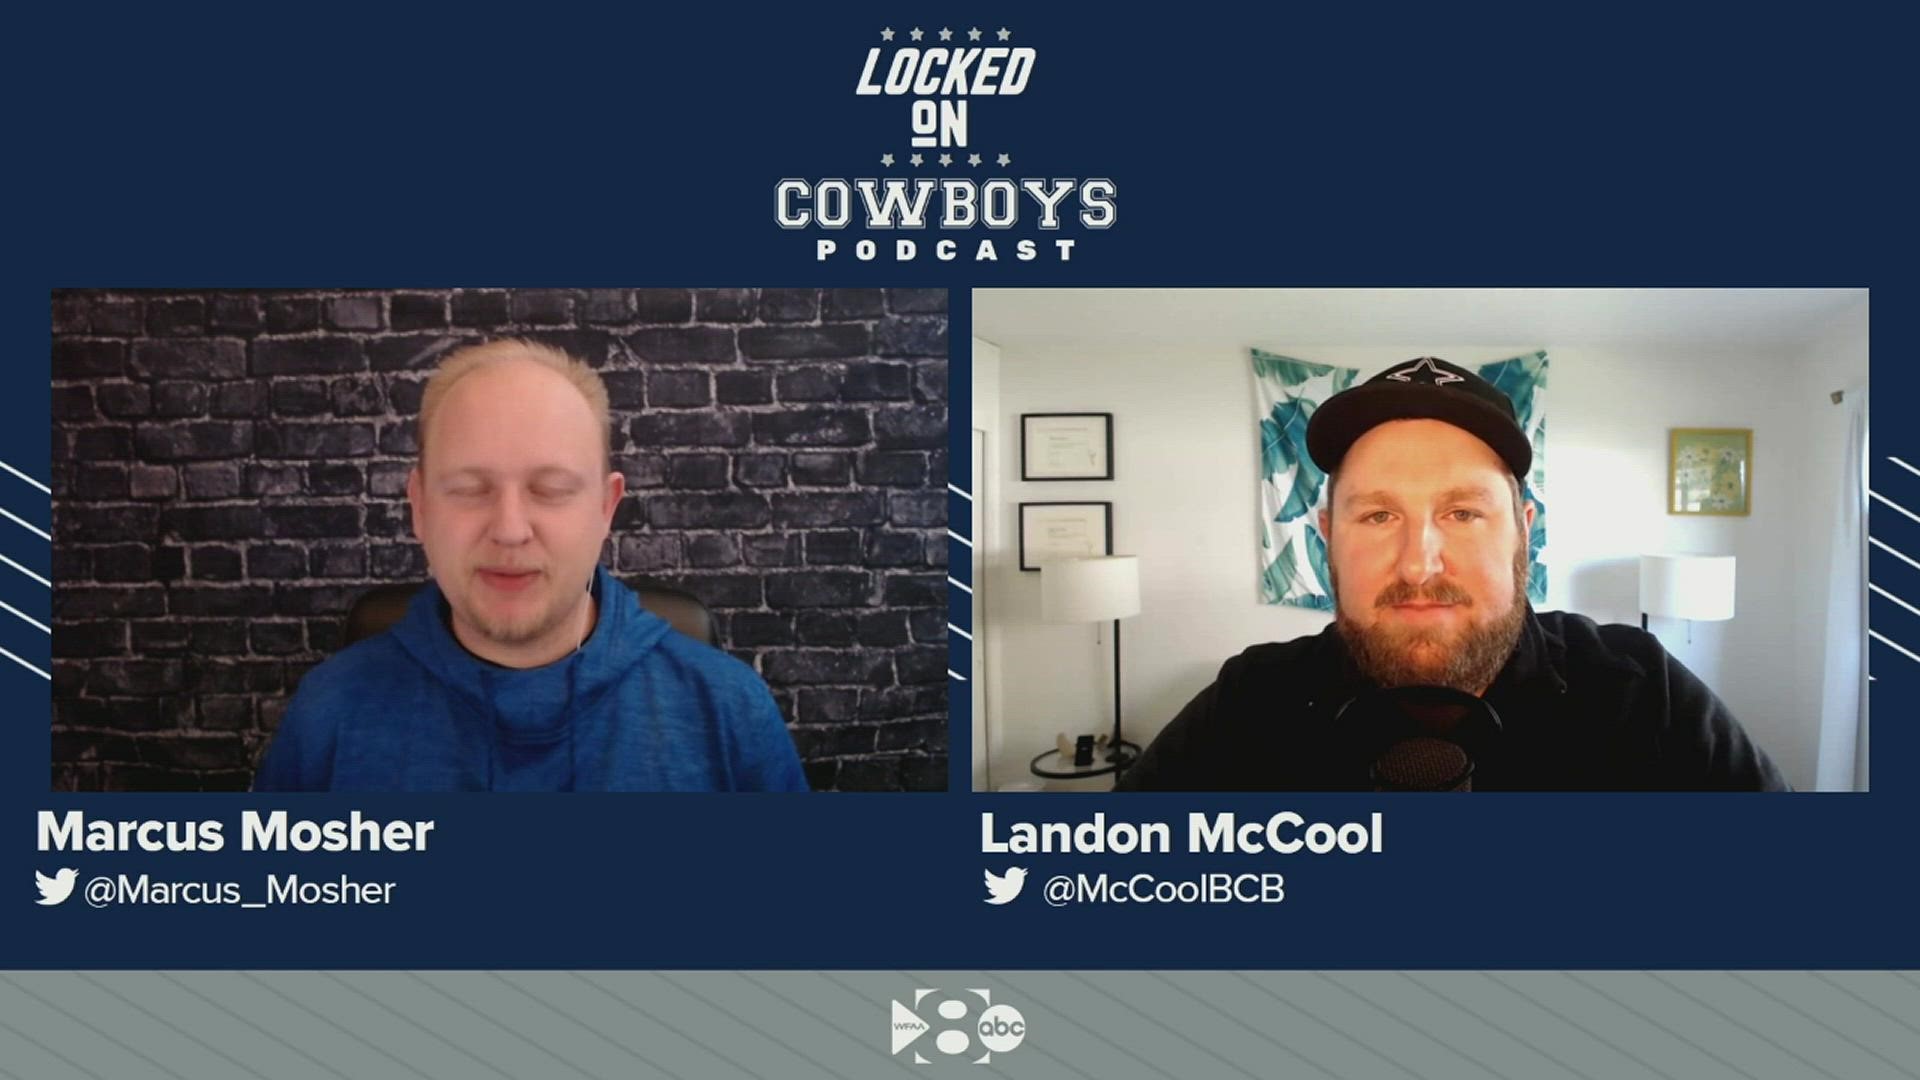 Marcus Mosher and Landon McCool discuss Reggie Robinson's return to cornerback and Jaylon Smith's shift to strongside linebacker on Friday's episode.